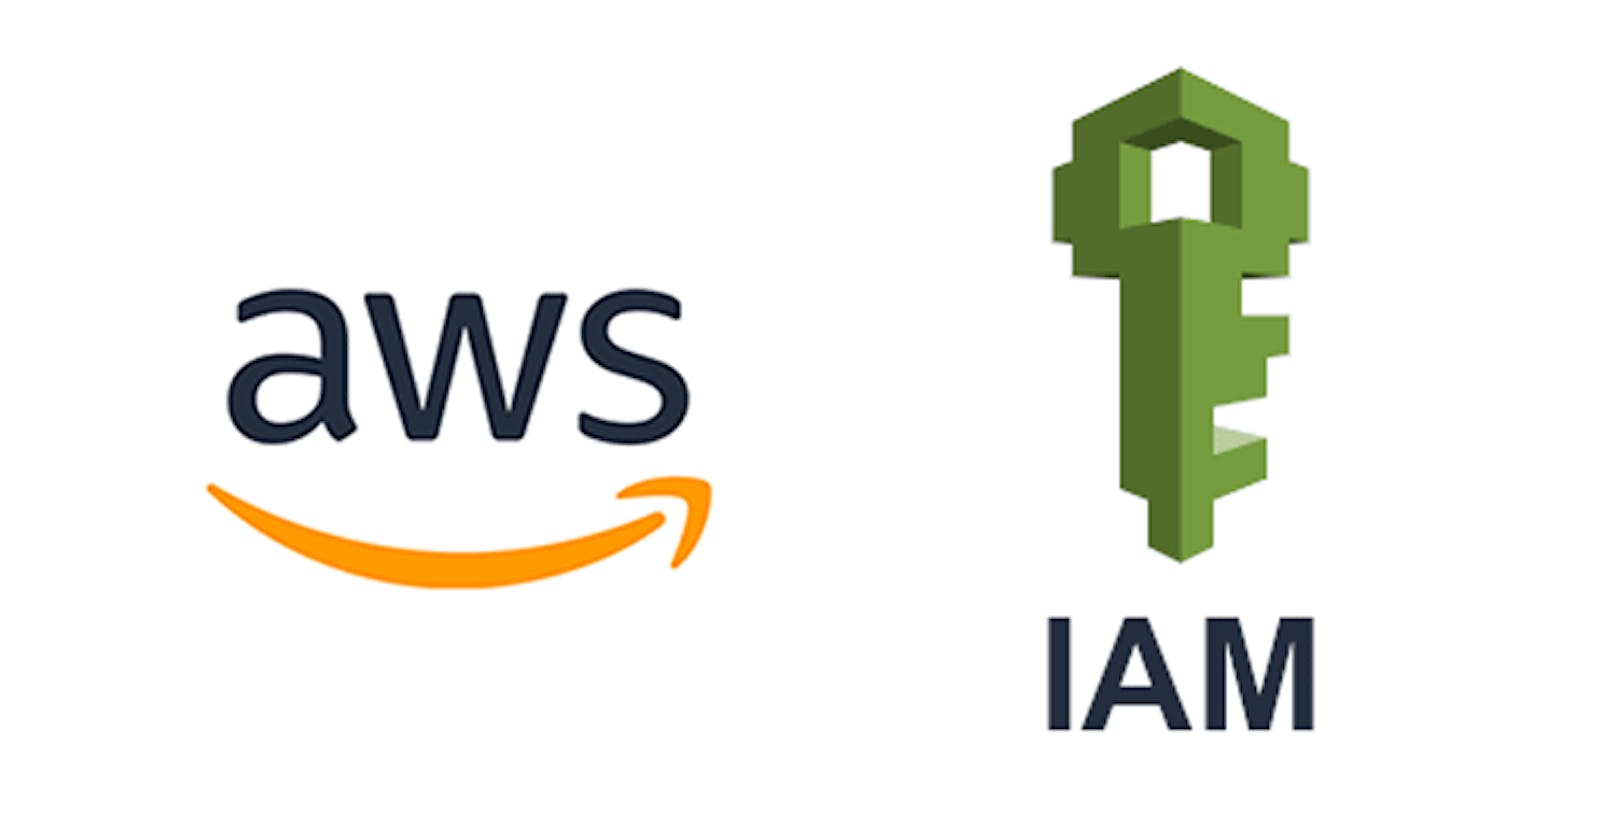 AWS IAM: Securely Control Access to AWS Resources with IAM